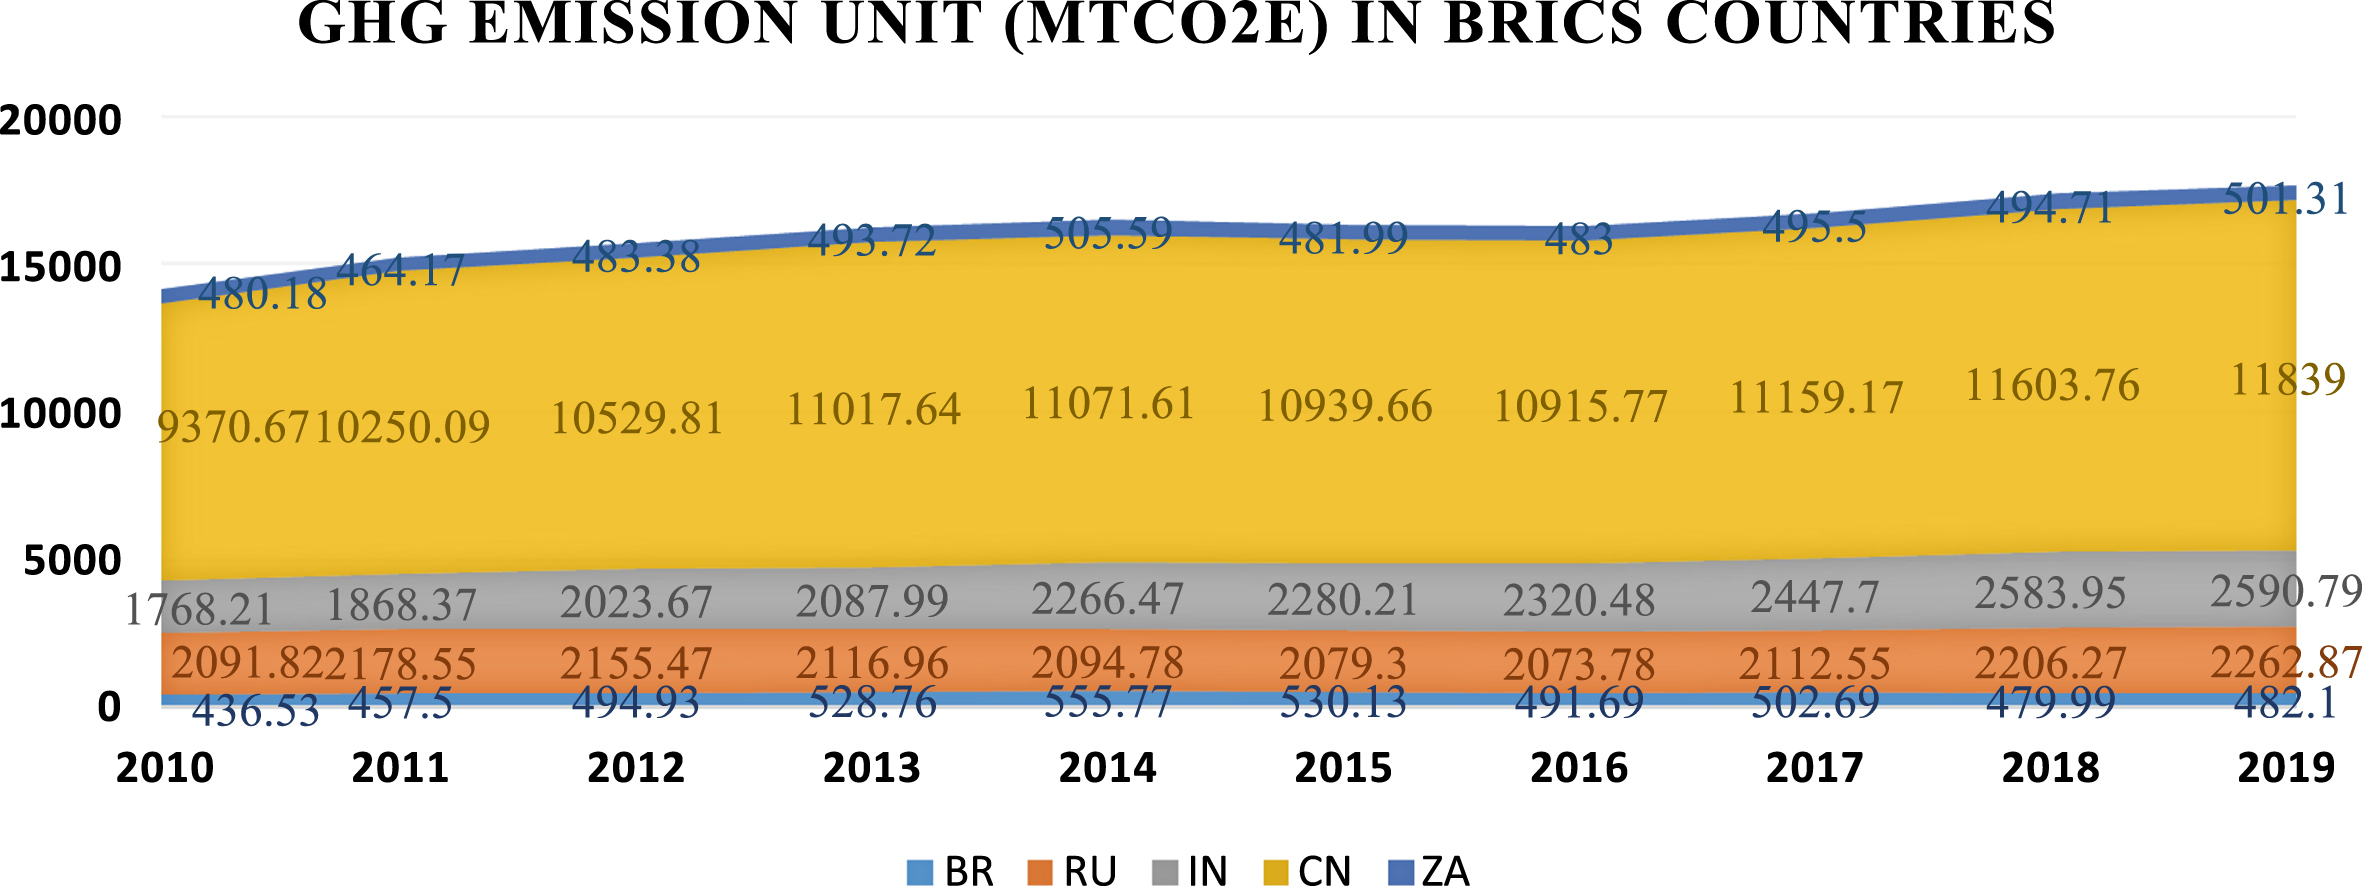 GHG emission in BRICS countries. (Data Source: Data Explorer, Climate Watch, Compiled by author).